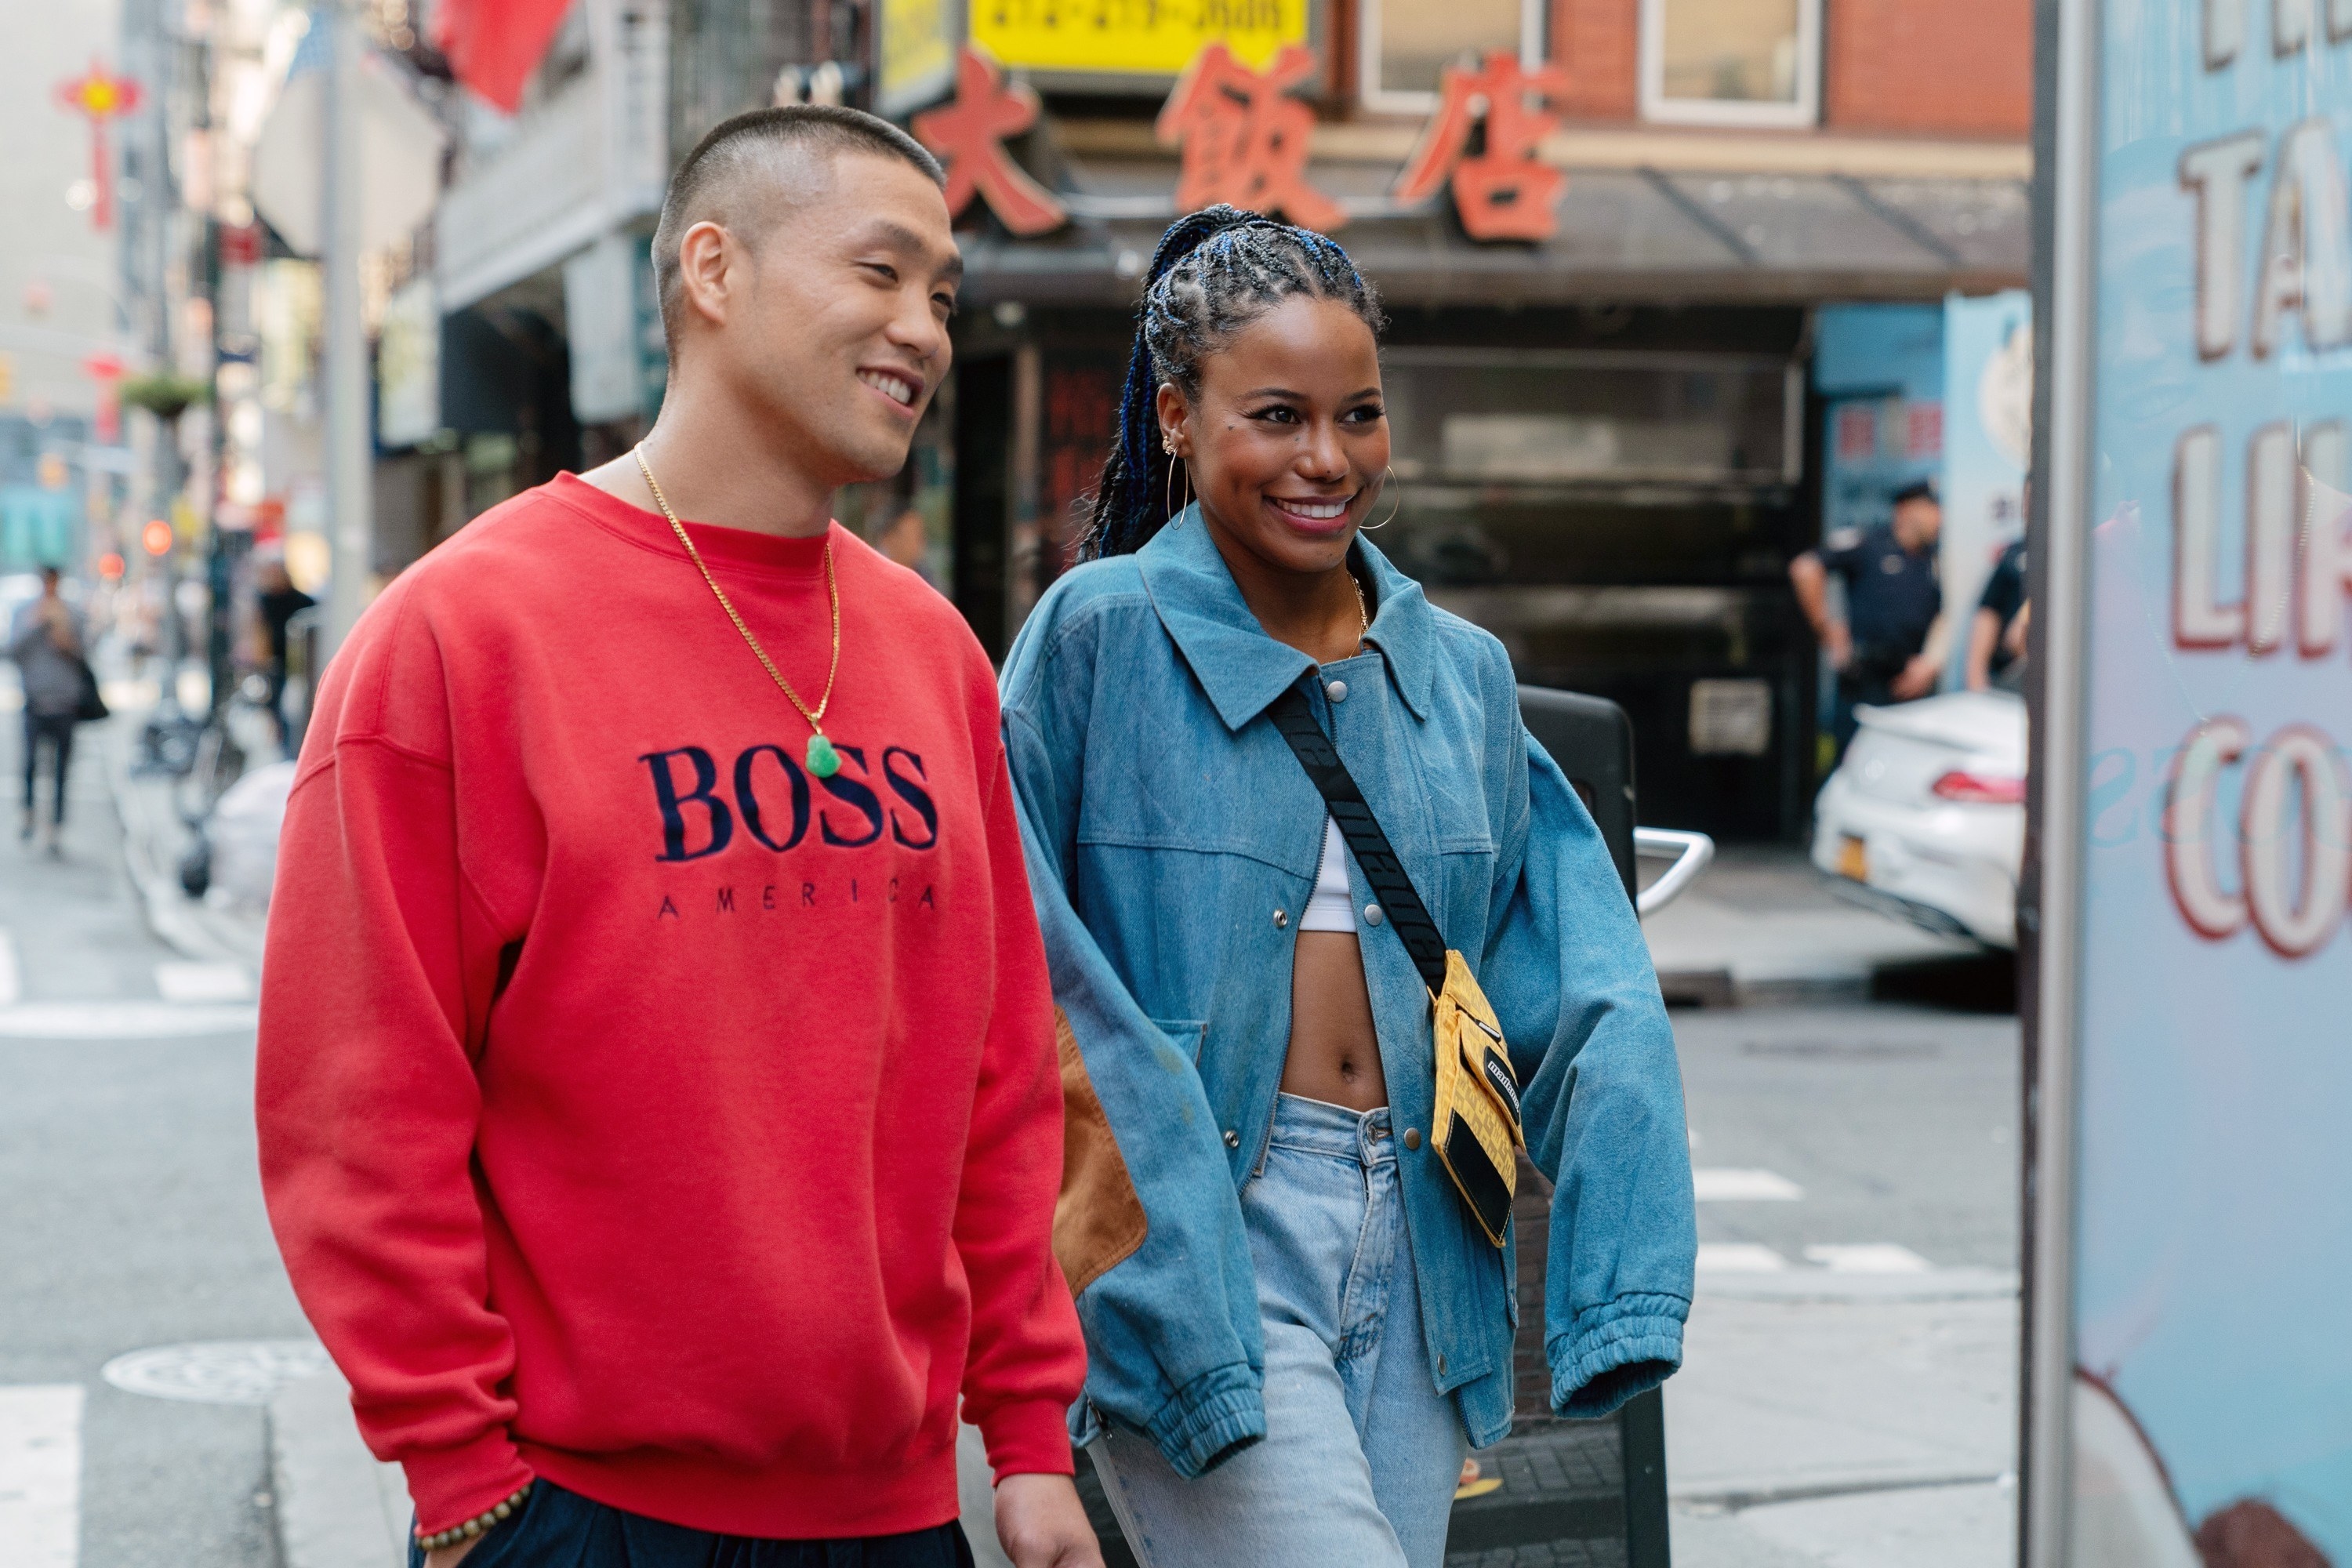 Taylor Takahashi in a red sweatshirt and Taylour Paige in a jean jacket smiling and walking down a street in NY